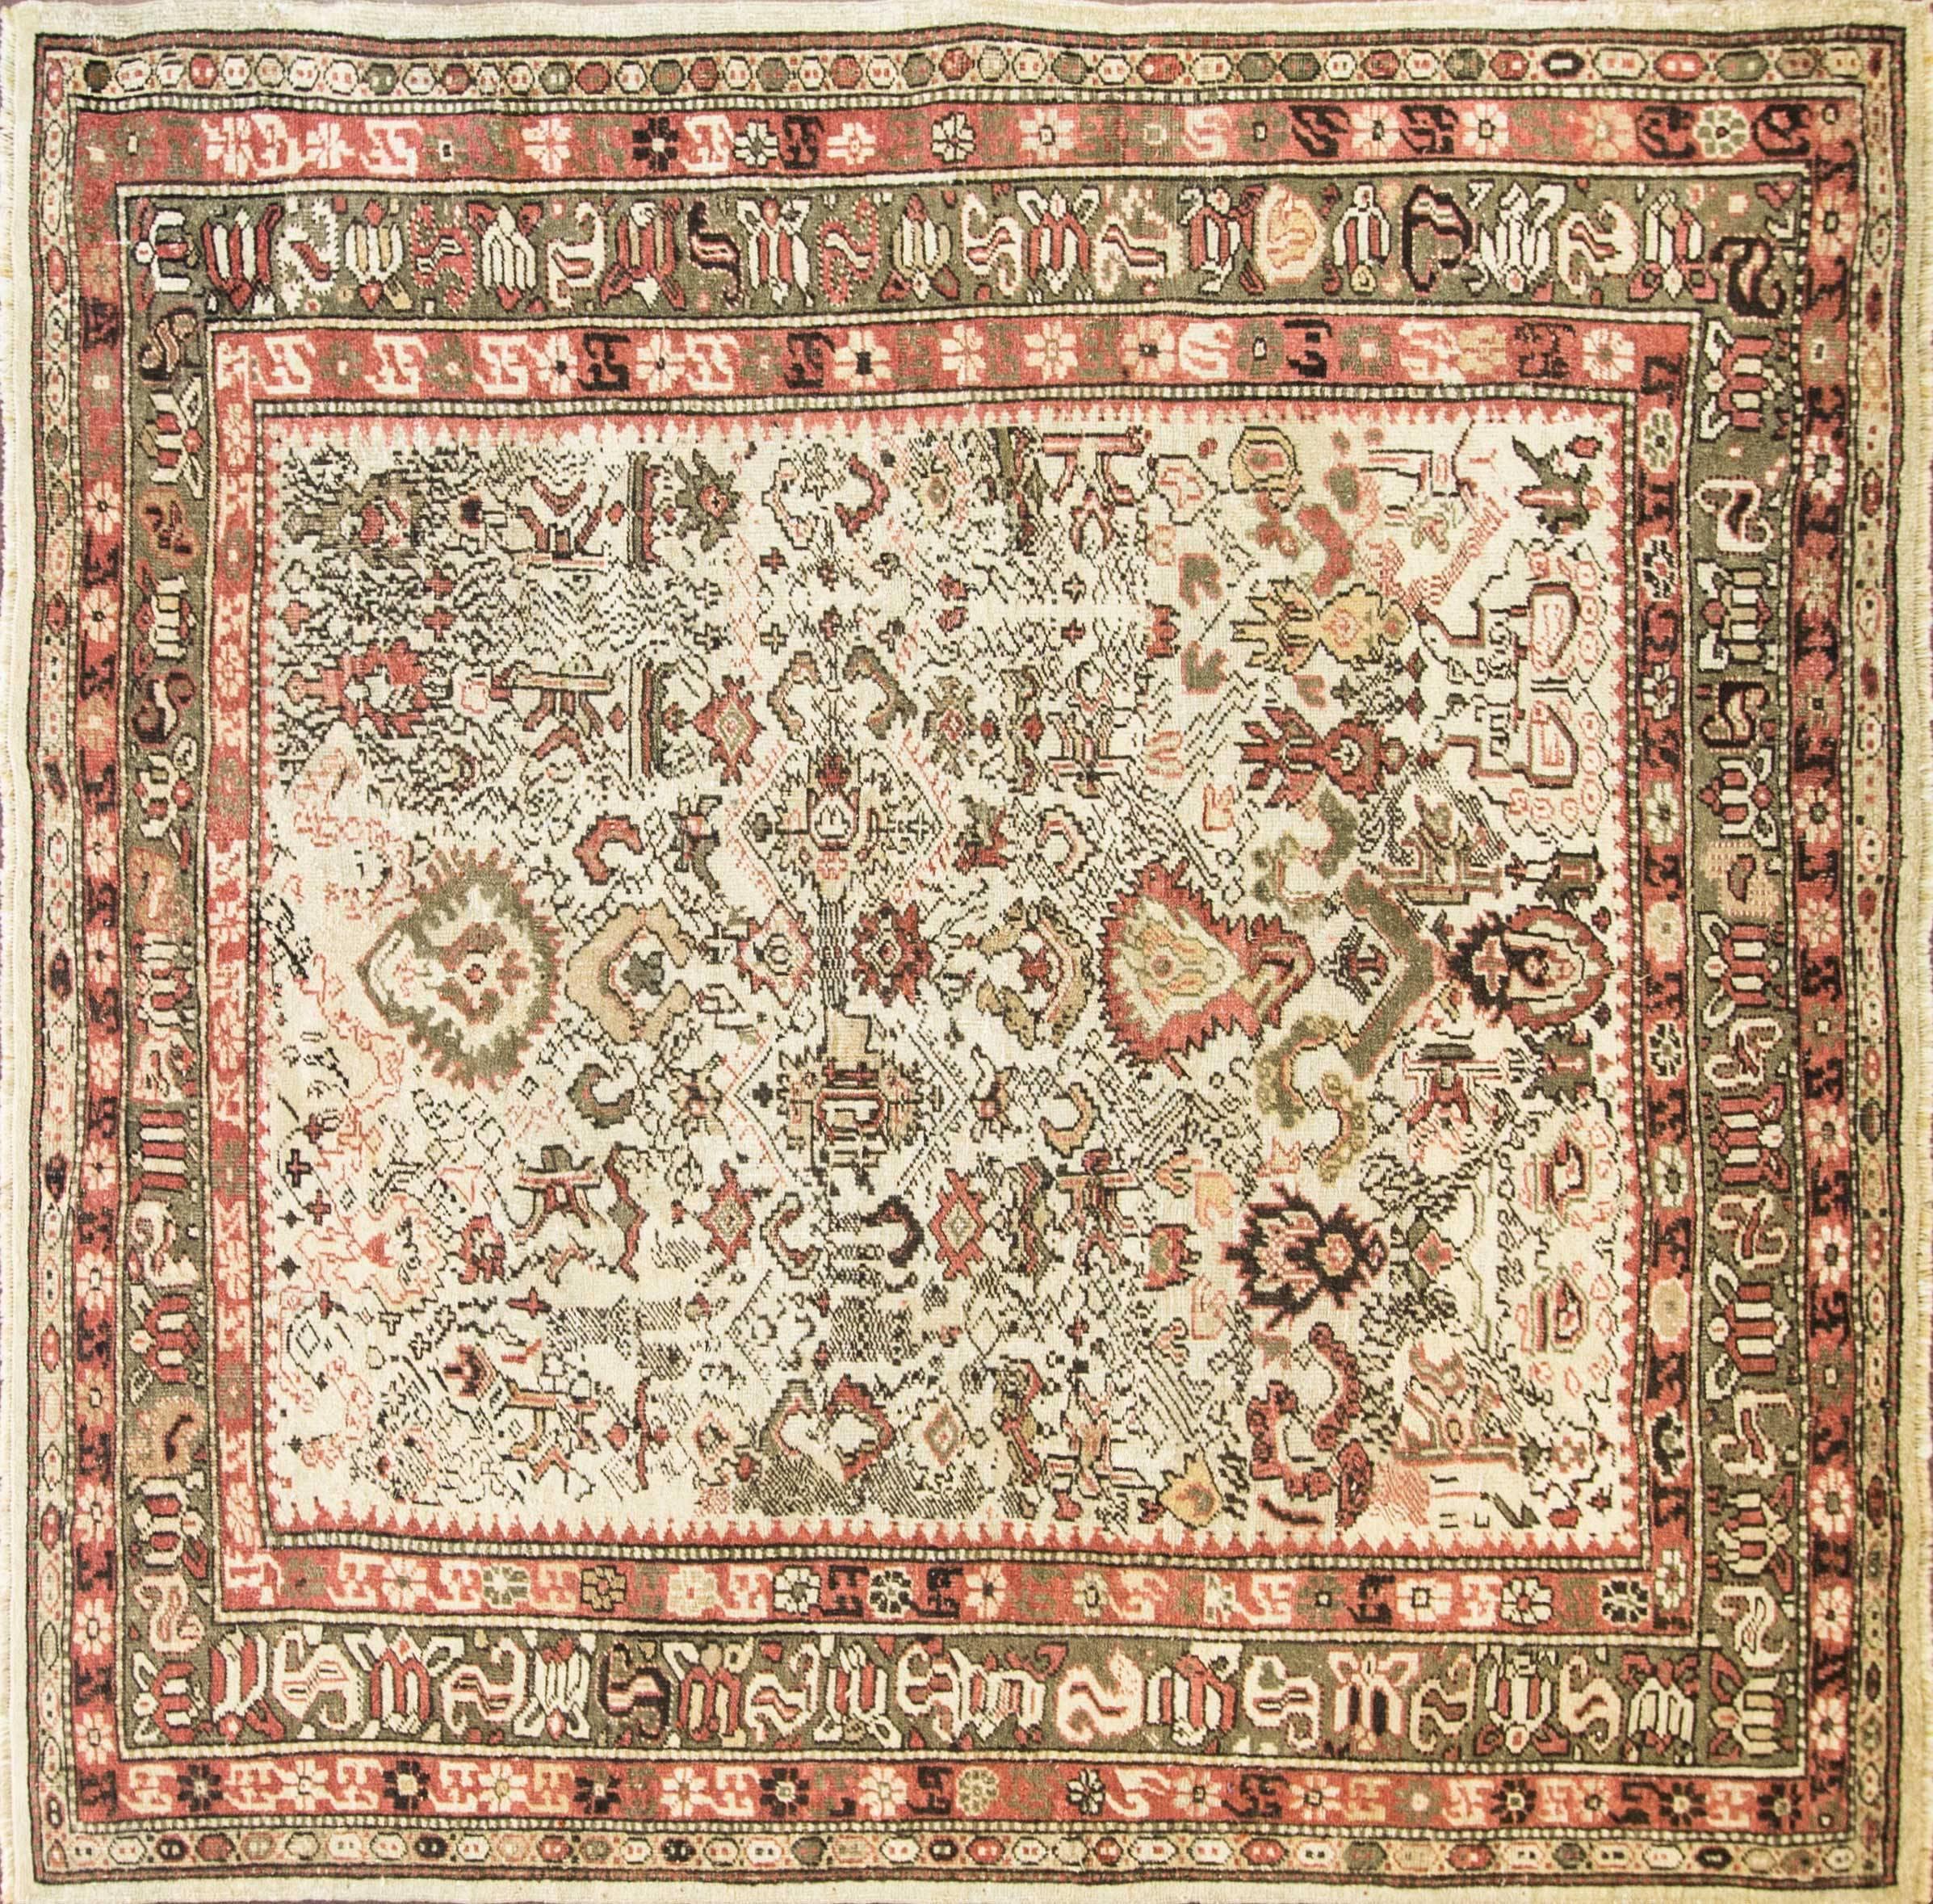 Bakshaish, Heriz Serapi. Bakshaish rugs made in Persia, Bakshaish (Bakshaish or Bakhshaysh) rugs adapt the style and feeling of the finest smaller village or tribal rugs to the scale of room-size pieces. The drawing of Bakshaish rugs and carpets is